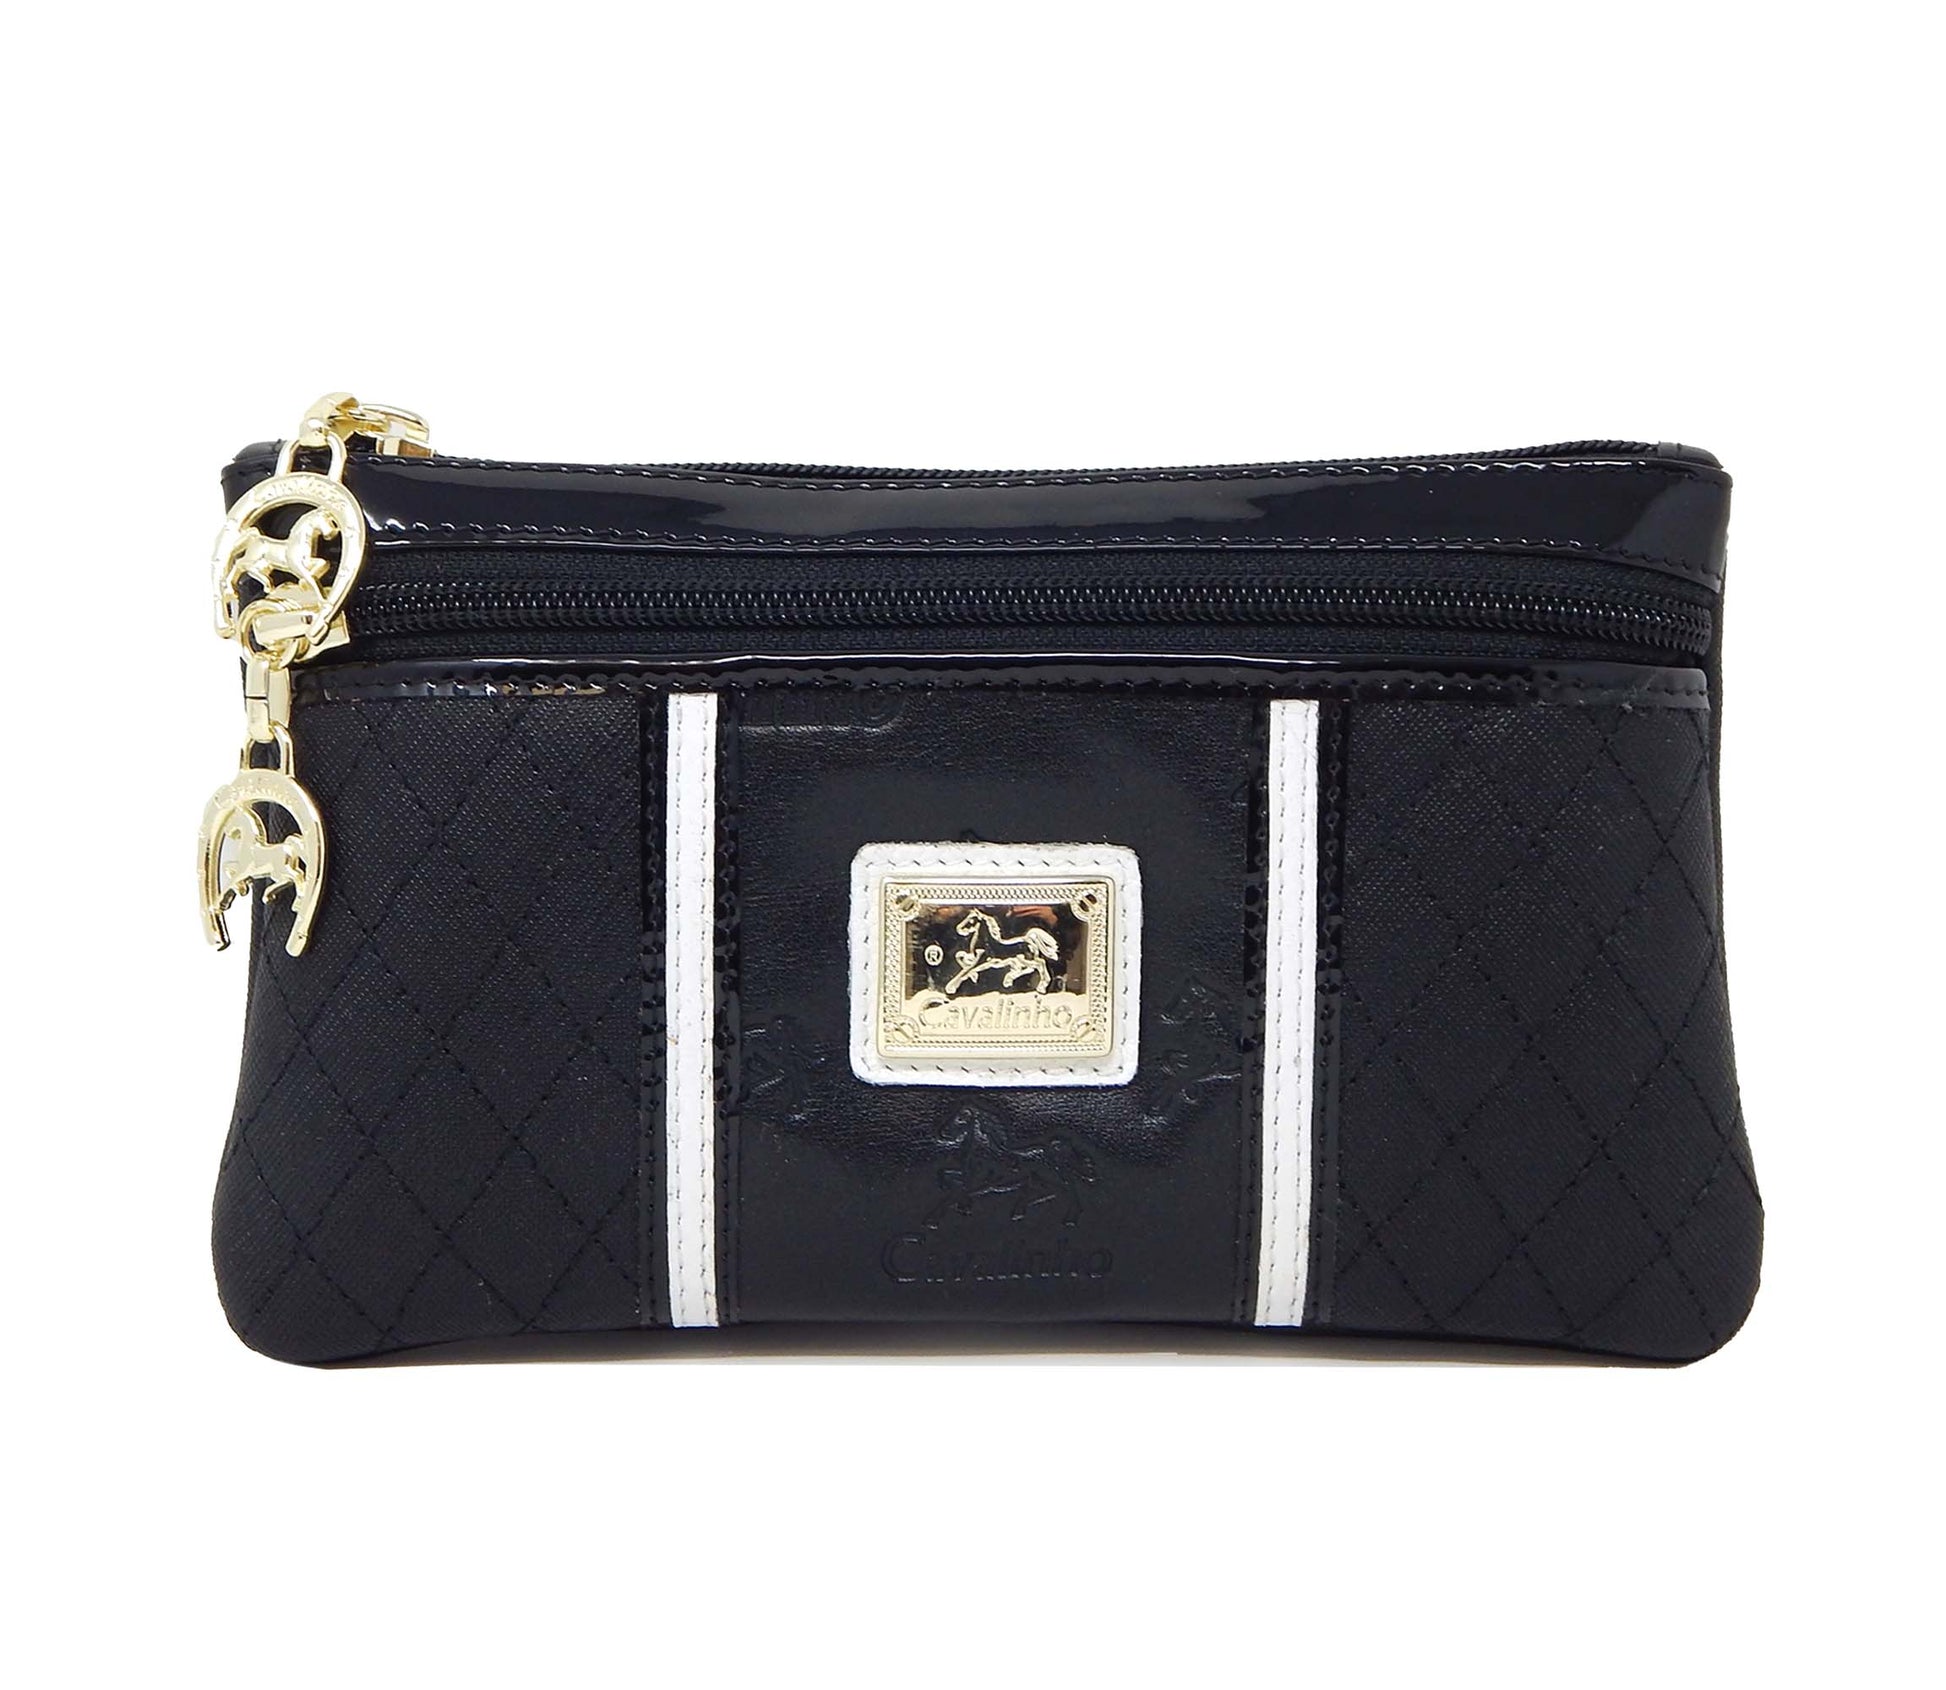 Cavalinho Royal Cosmetic Case - Black and White - 28390256.21.99_1